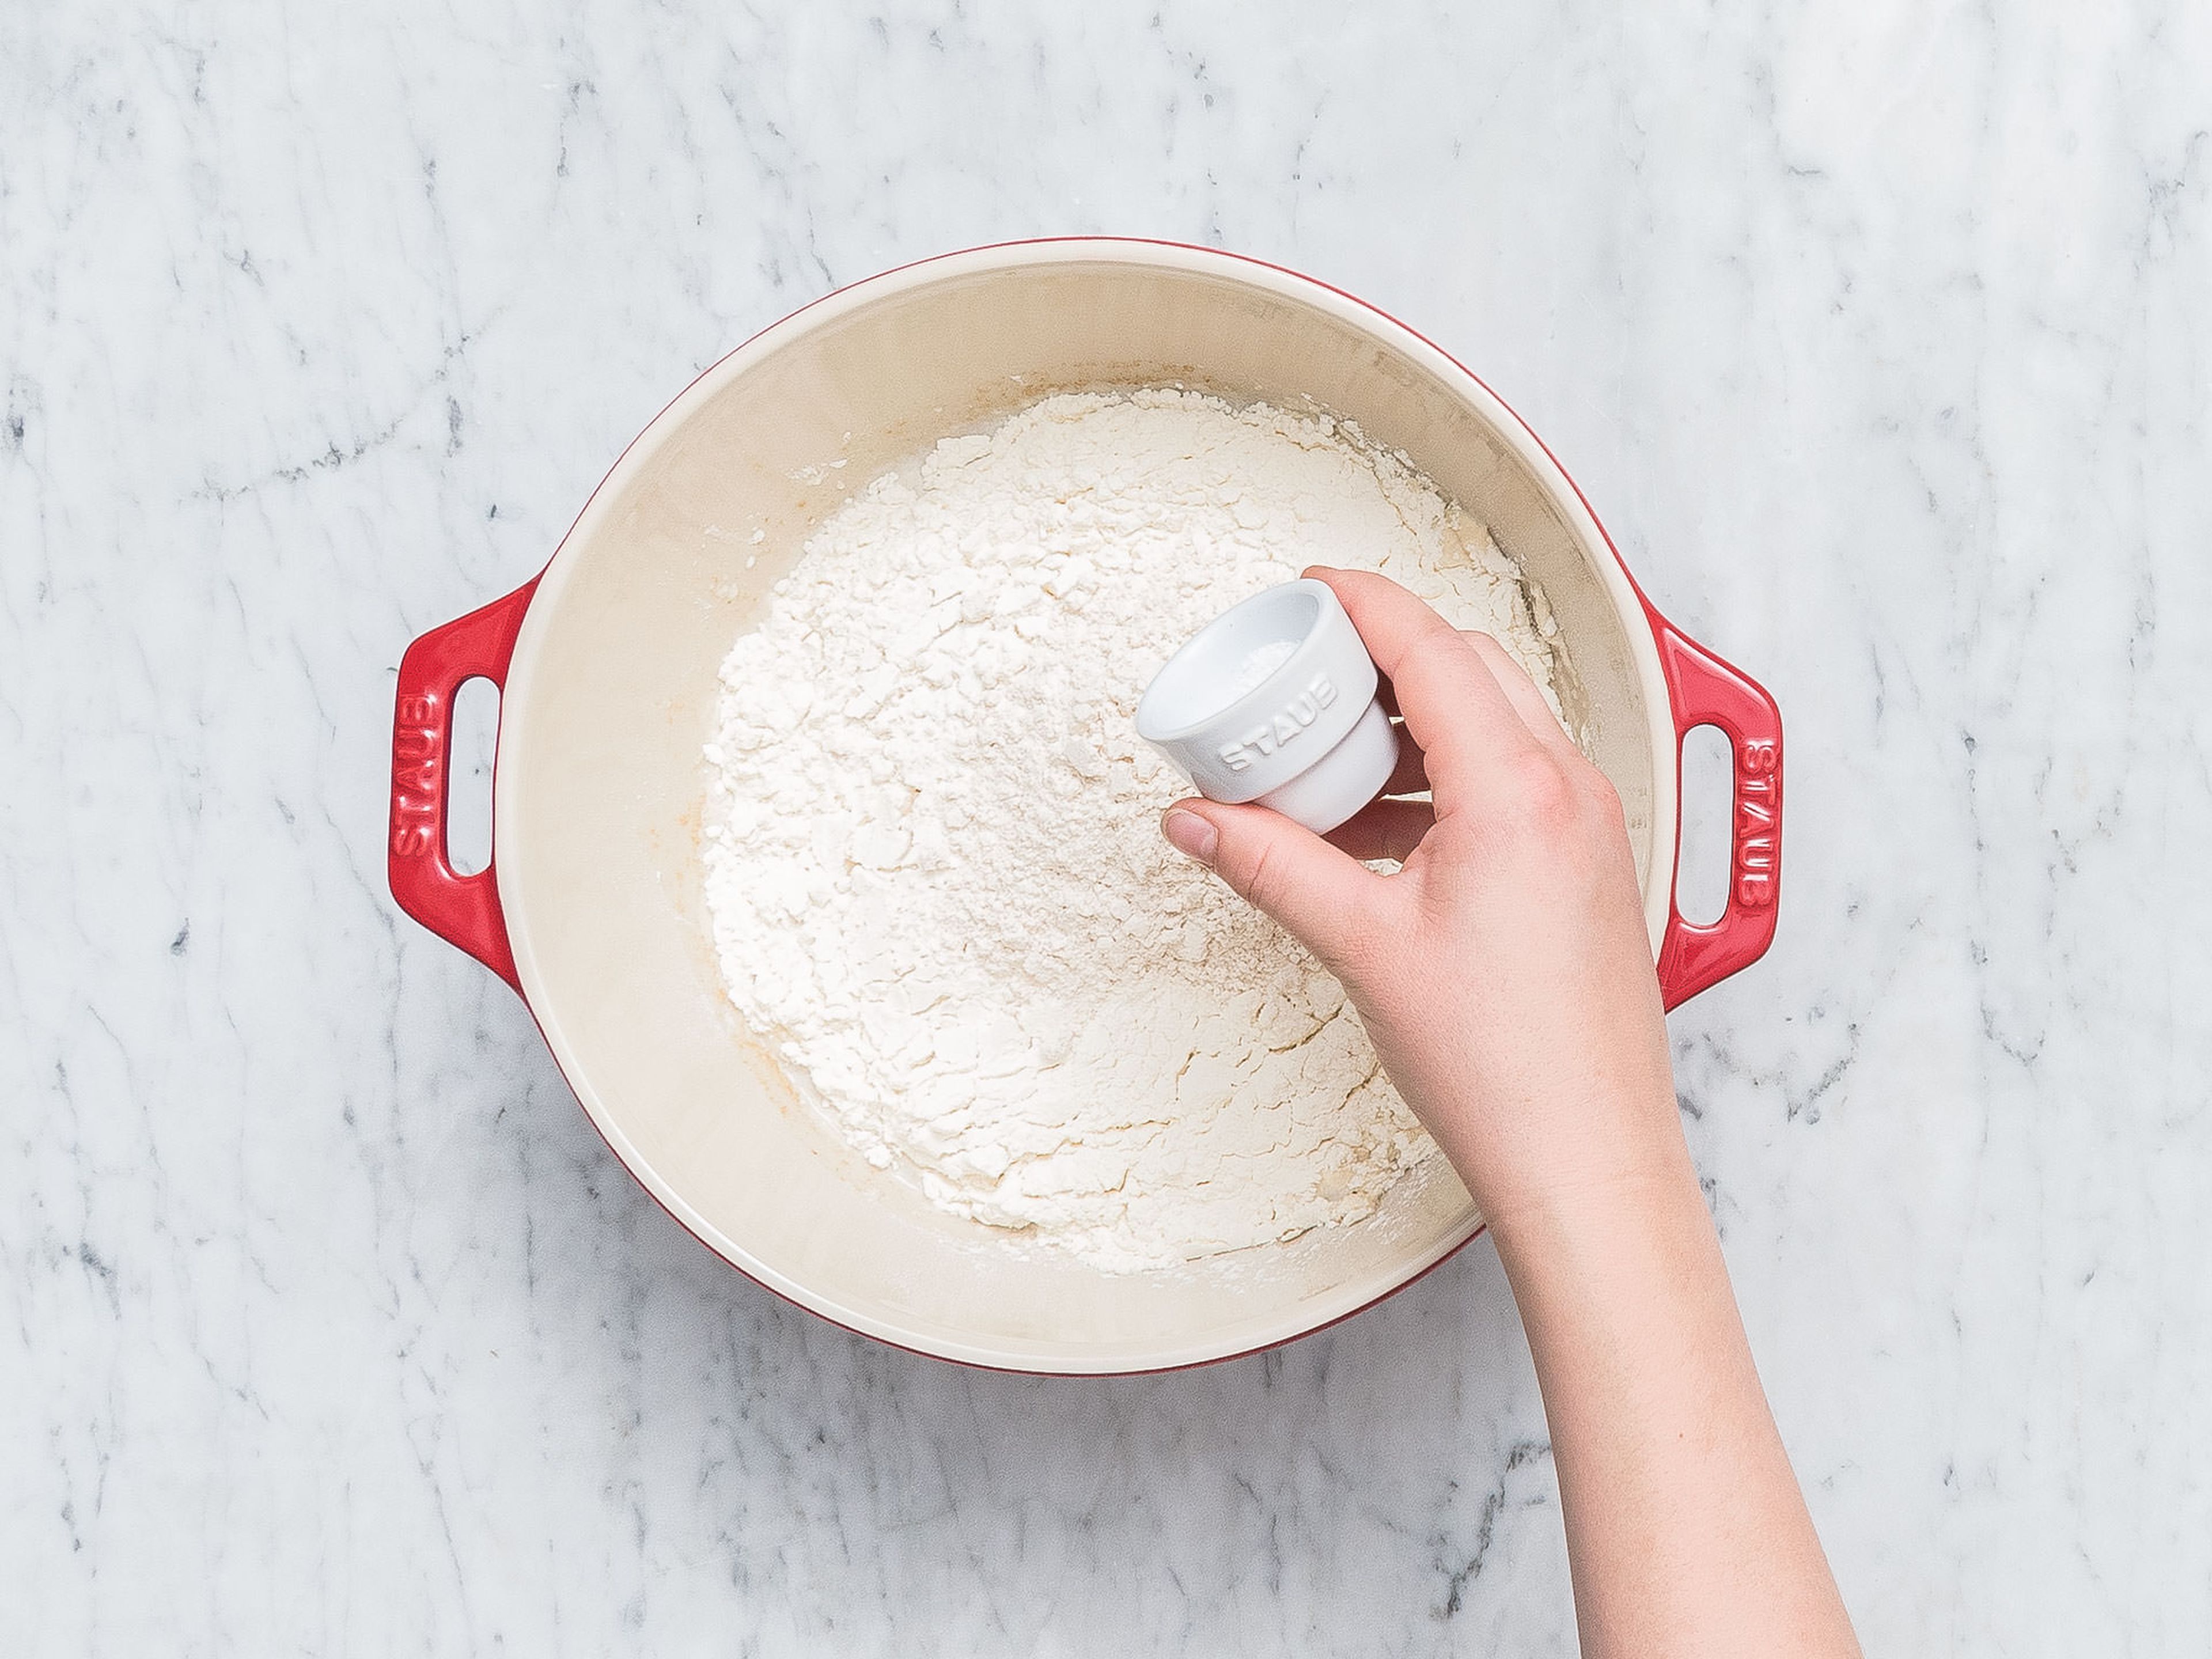 Add lukewarm water, fresh yeast, and sourdough starter to a large bowl and whisk until the yeast is dissolved. Add bread flour, whole-wheat spelt flour, and salt. Stir with a spatula until it becomes a smooth dough. Let rest at 25°C/75°F for approx. 40 – 45 min.